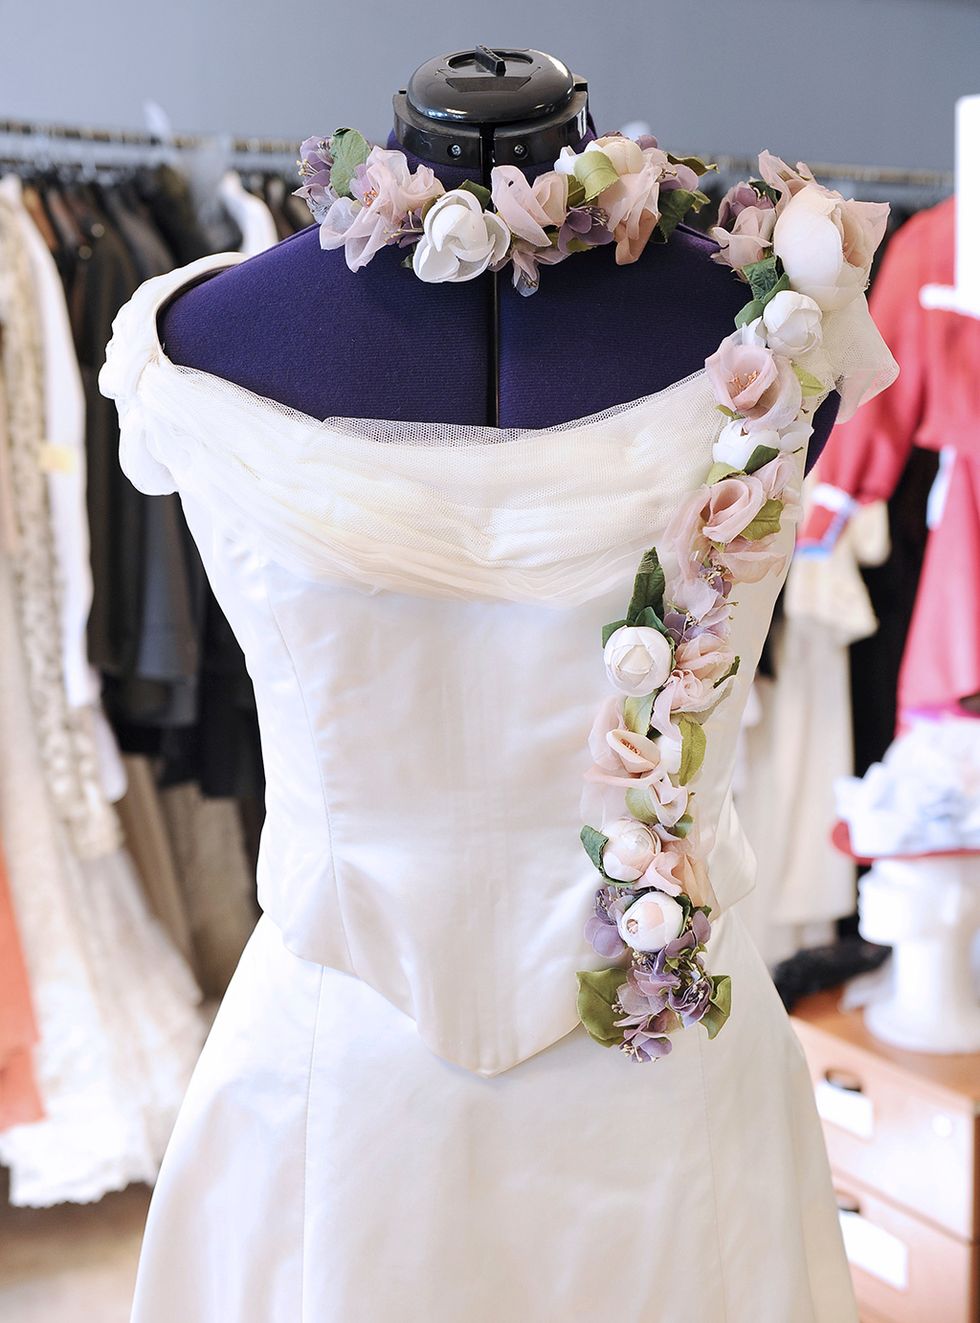 Dress, Gown, Pink, Wedding ceremony supply, Wedding dress, Purple, Bouquet, Flower, Bridal clothing, Floristry, 